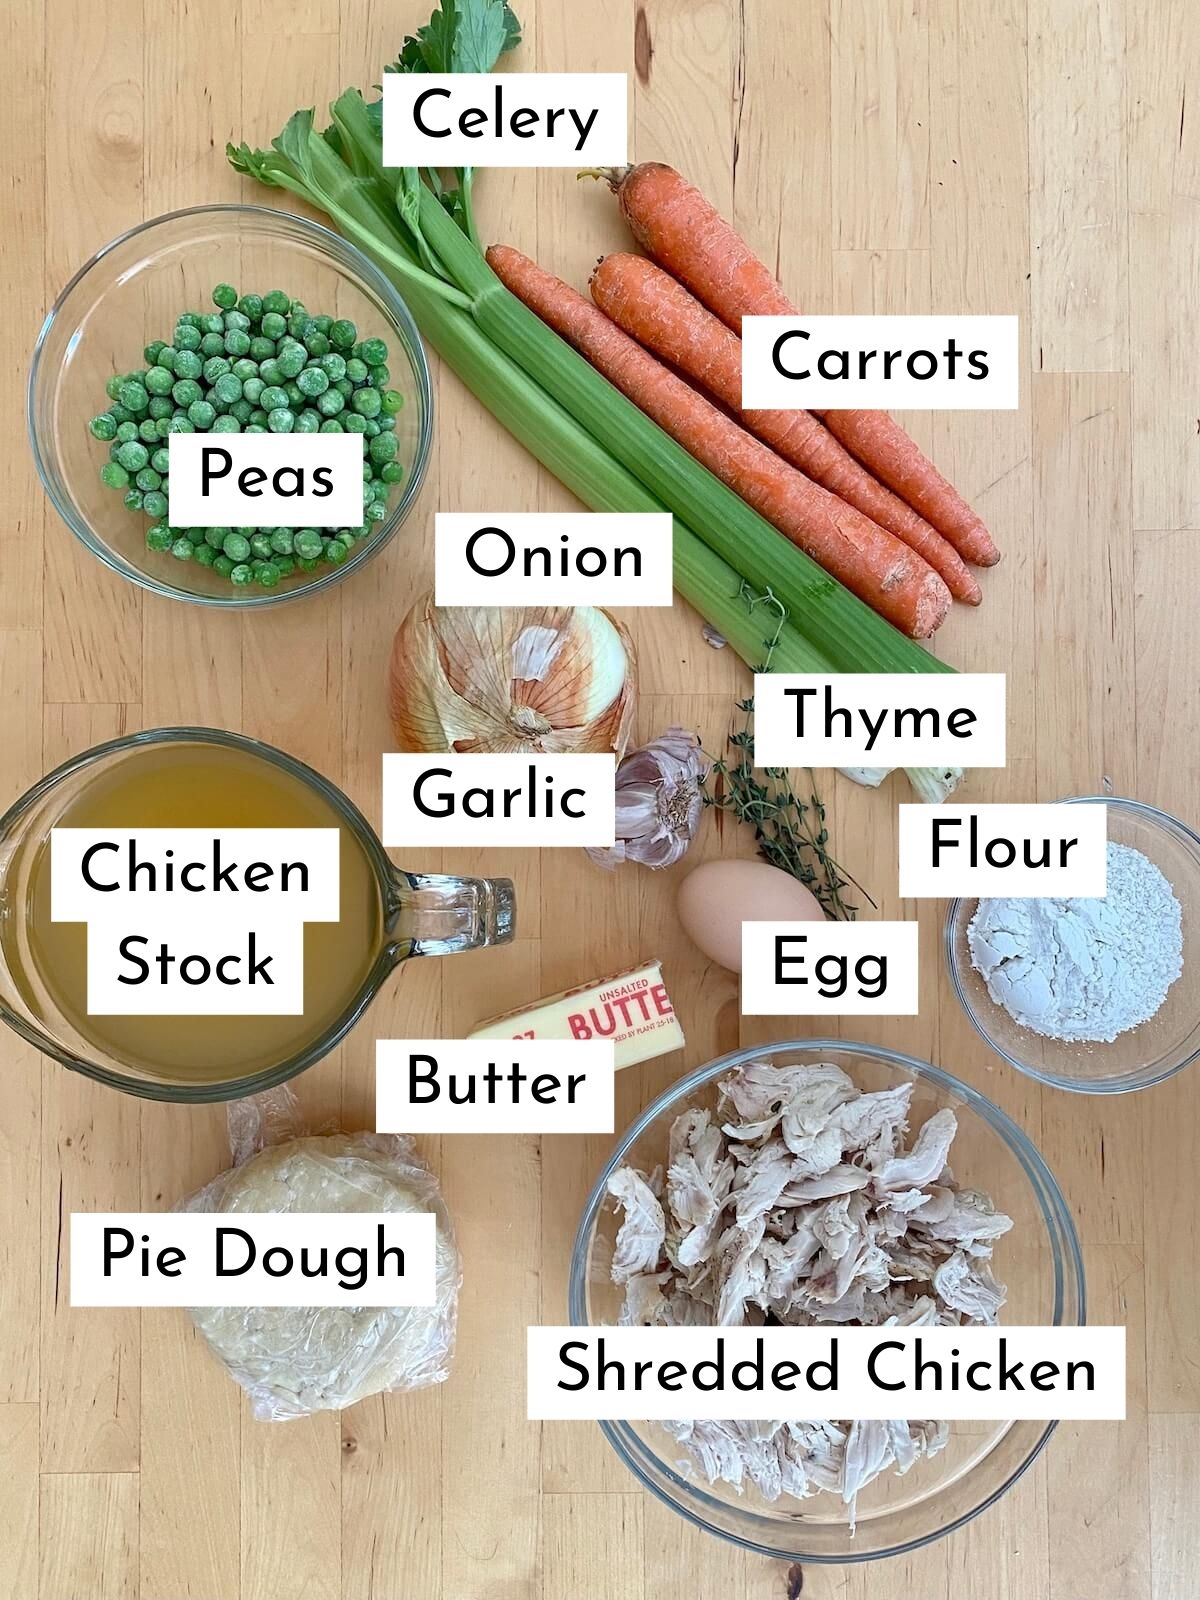 The ingredients to make dutch oven chicken pot pie. There is text over each ingredient stating what it is. The ingredients include celery, carrots, onion, peas, garlic, thyme, flour, shredded chicken, butter, chicken stock, pie dough, and an egg.